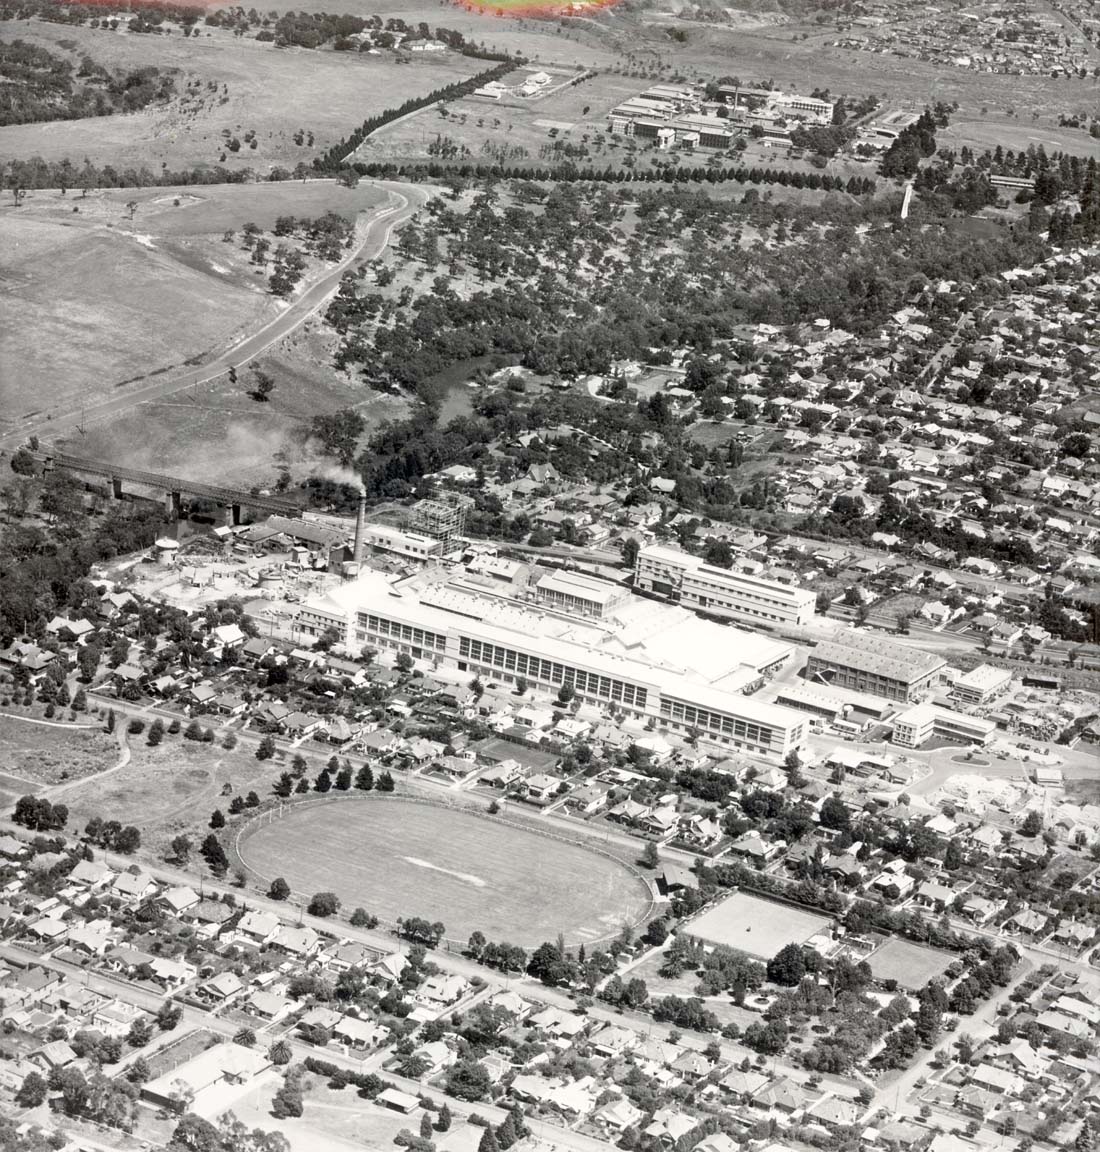 Image of The paper mill from the air